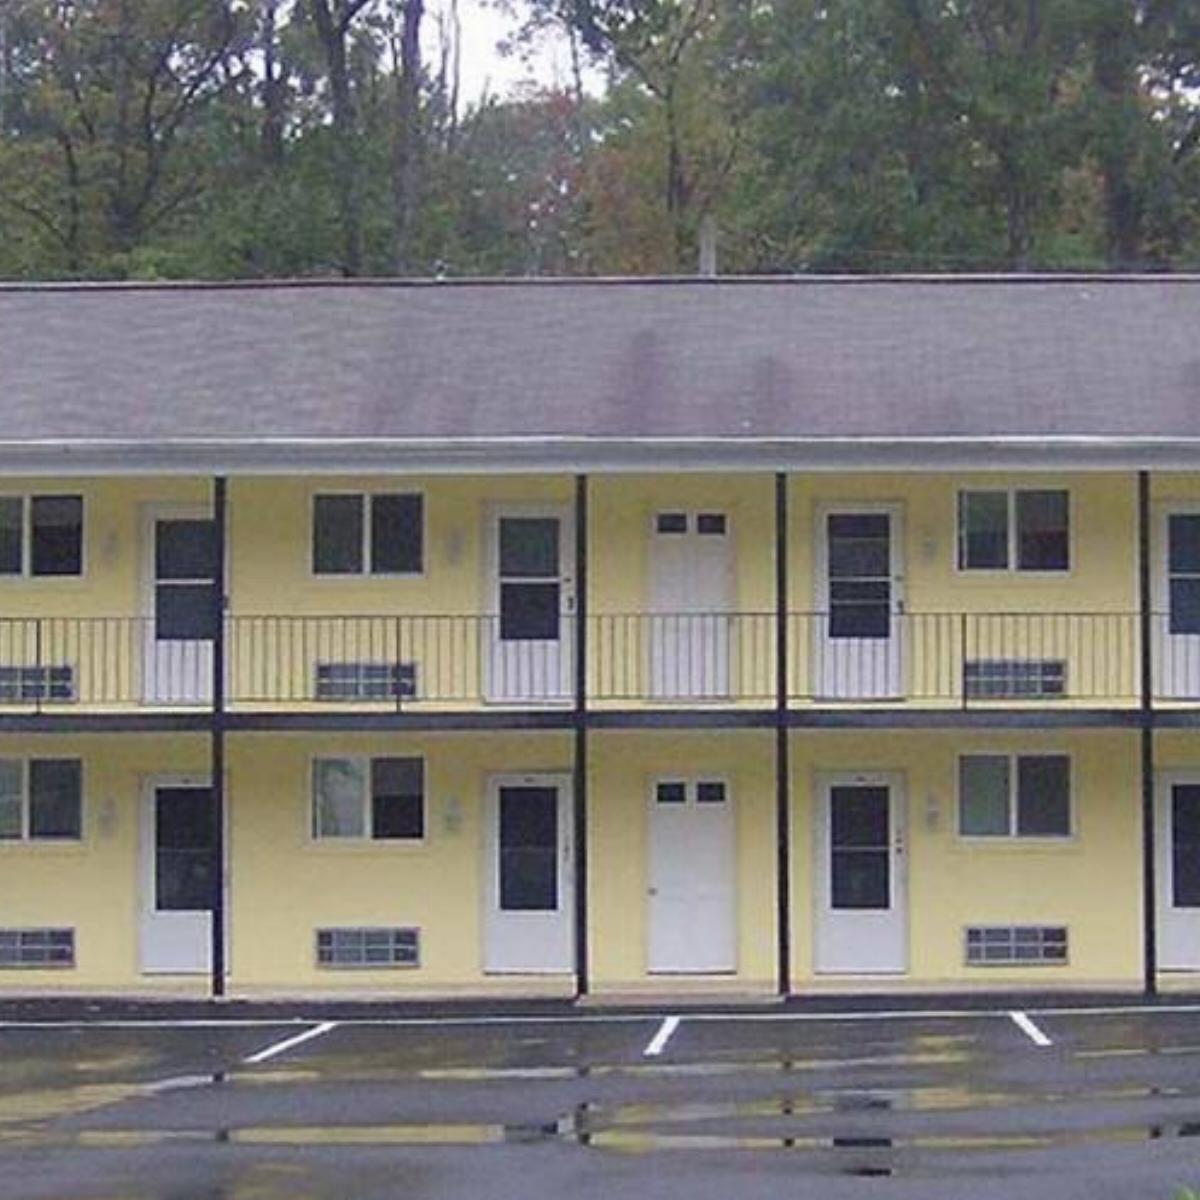 Country Place Inn and Suites White Haven